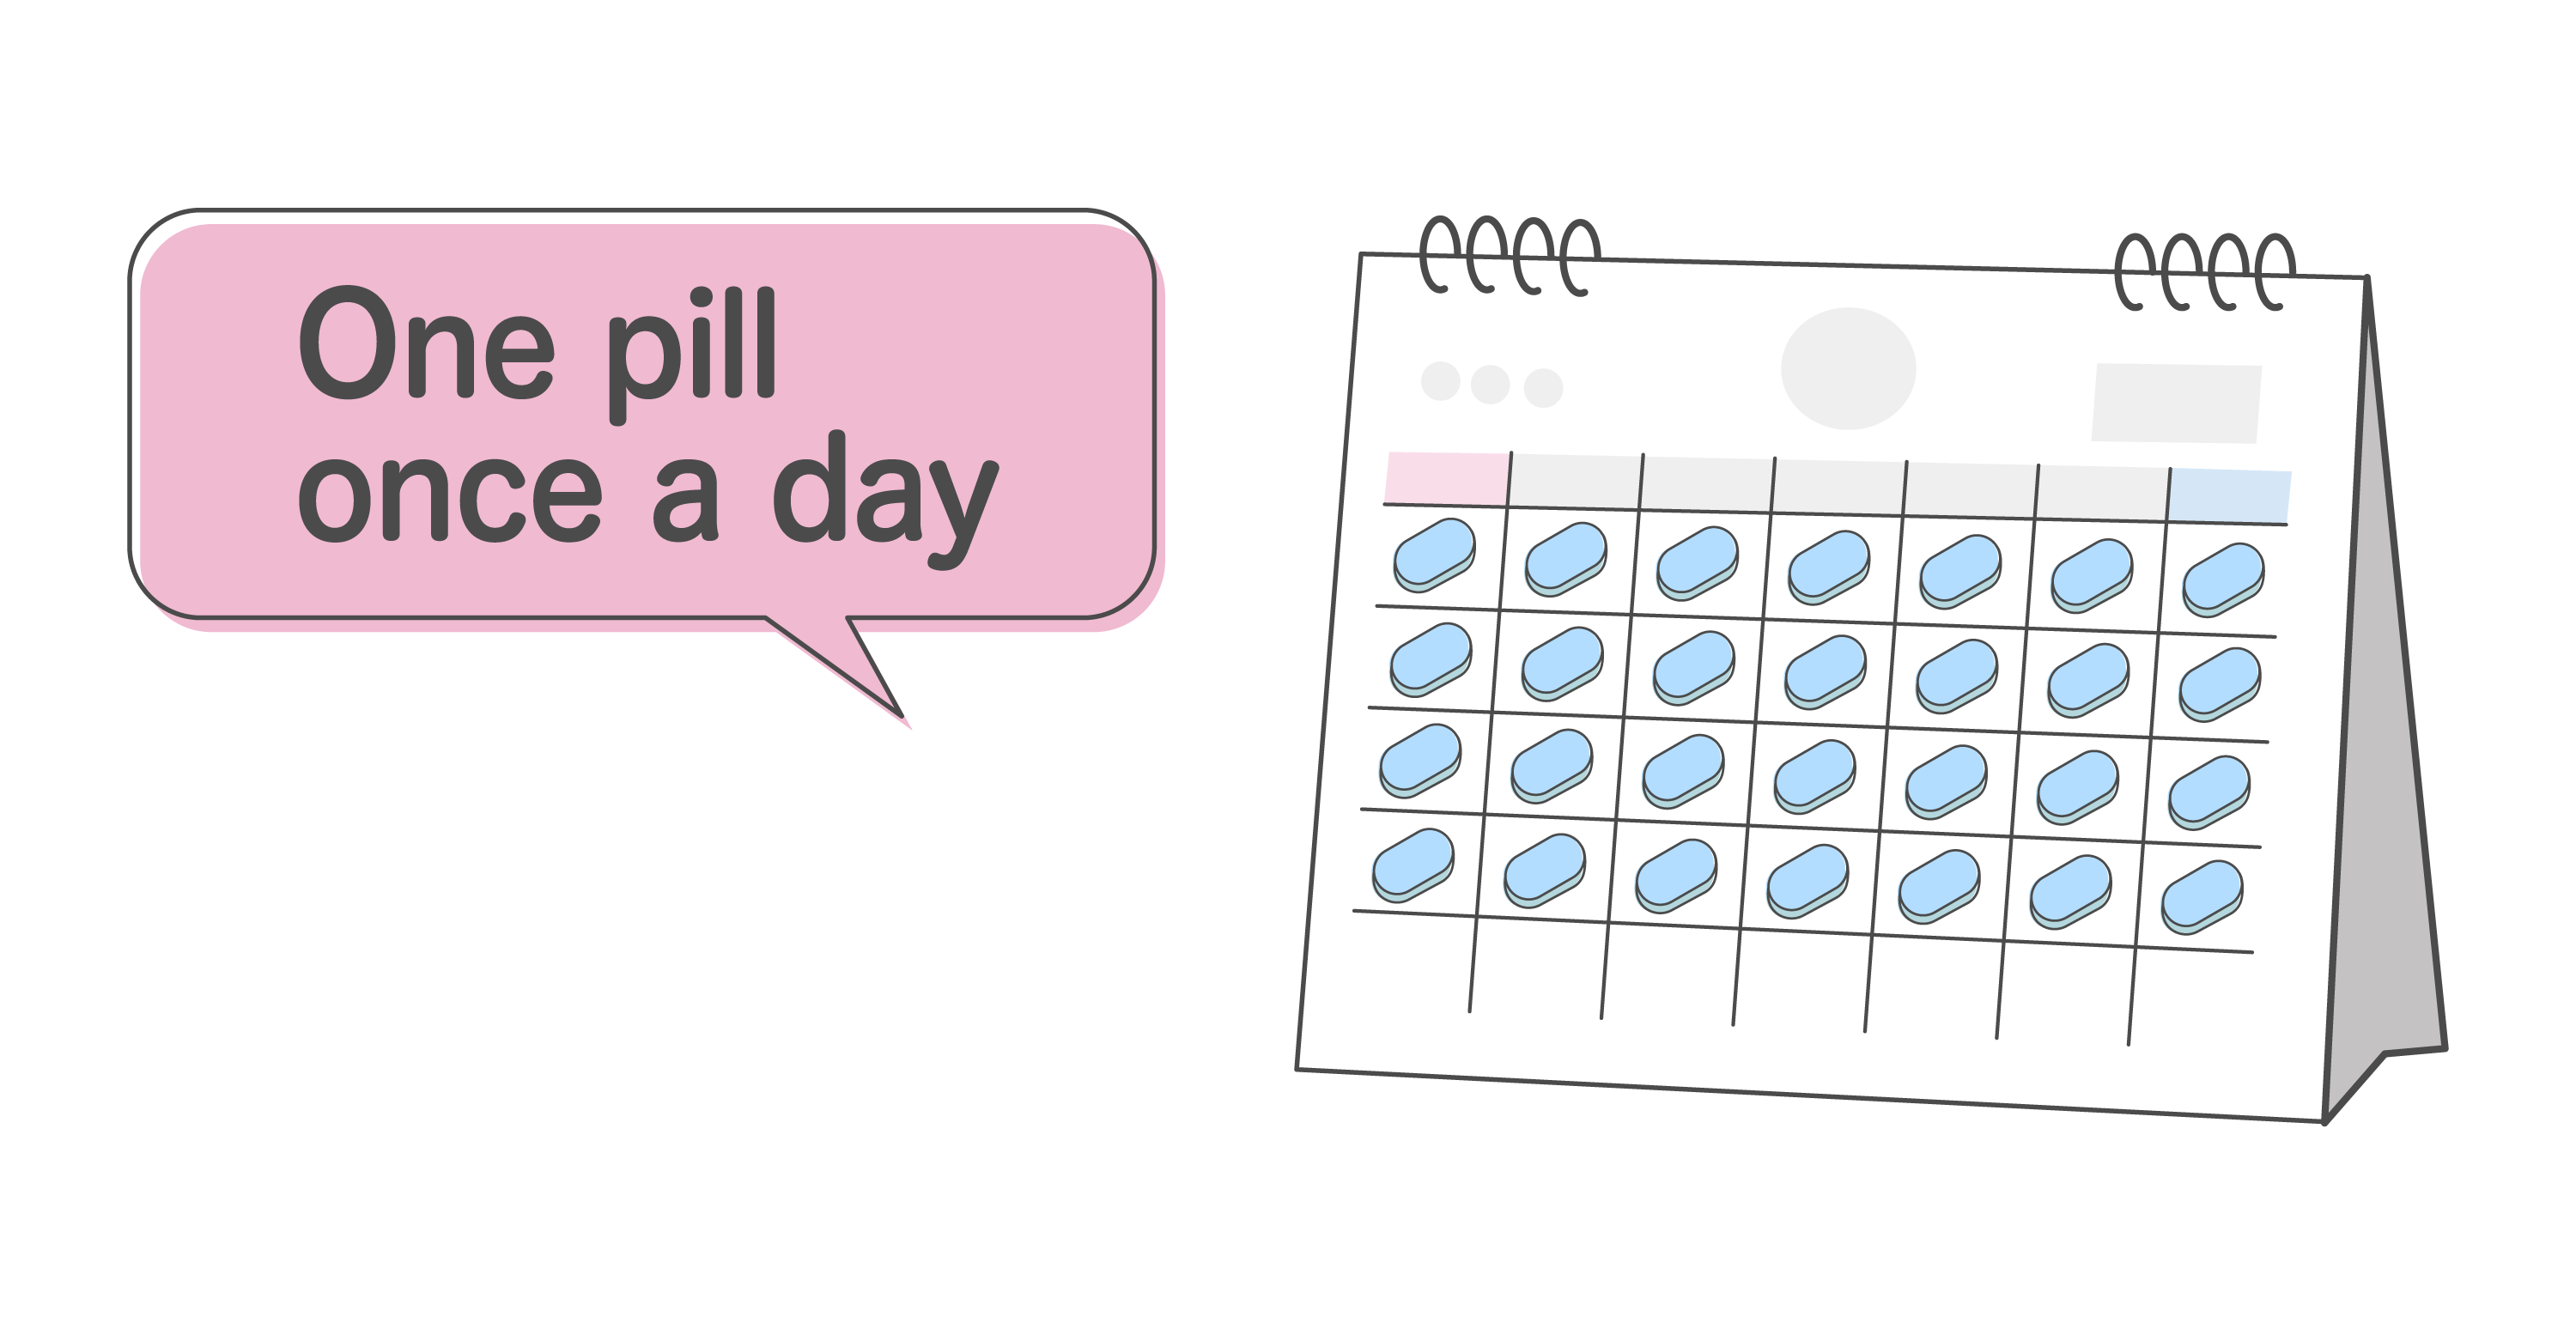 Take one pill once a day at the same time